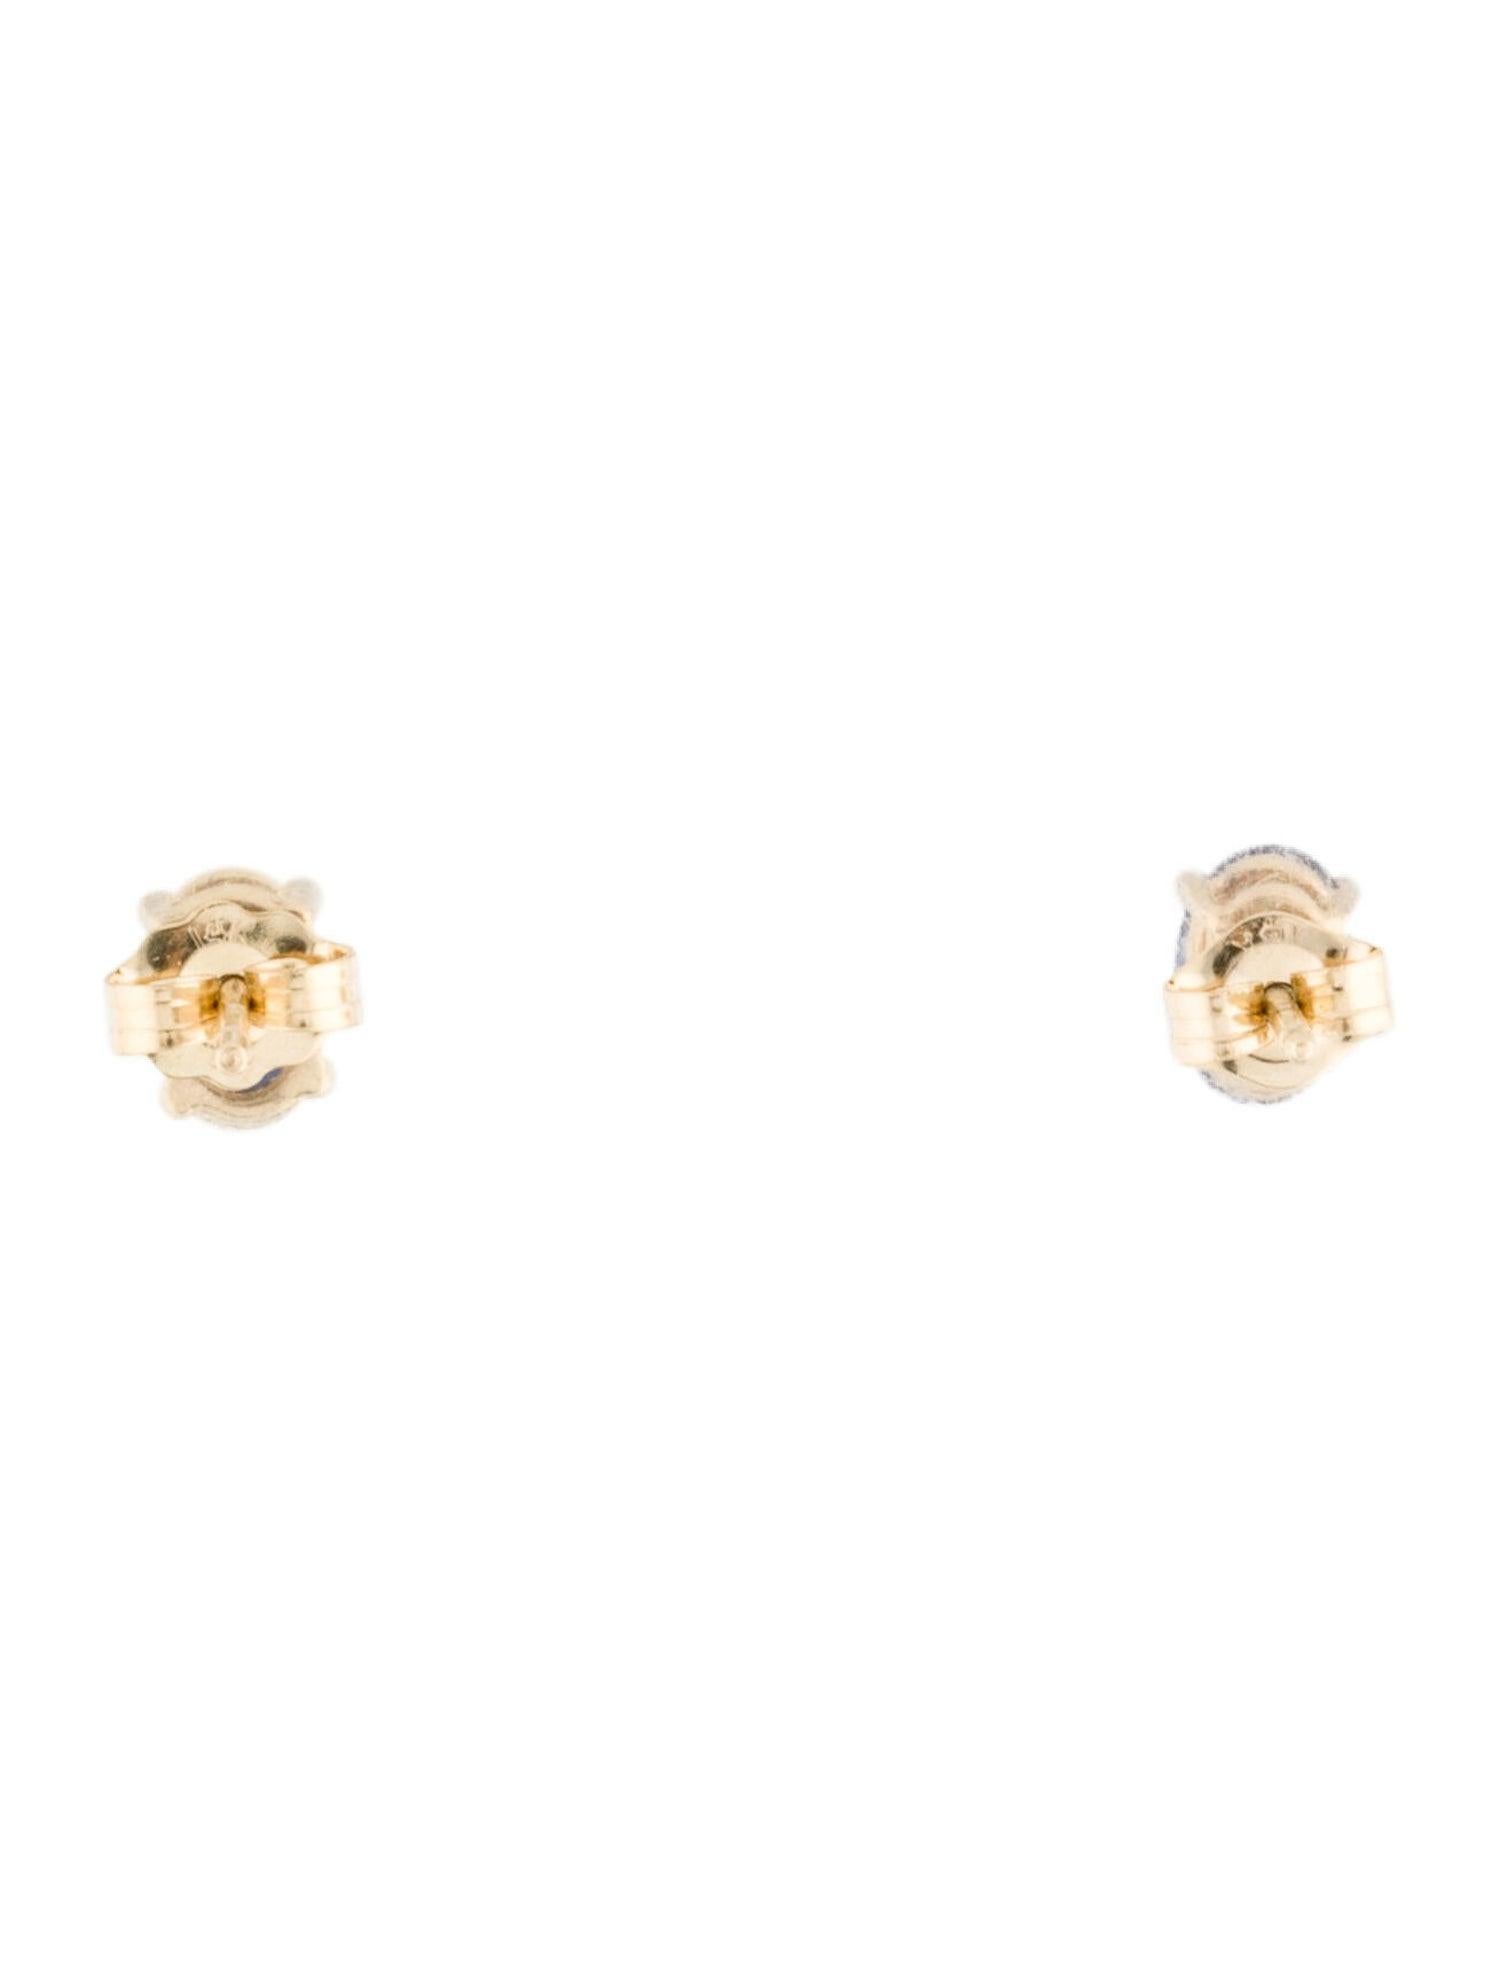 Contemporary 14 Karat Yellow Gold 1.30 Carat Sapphire Oval Shape Stud Earrings For Sale